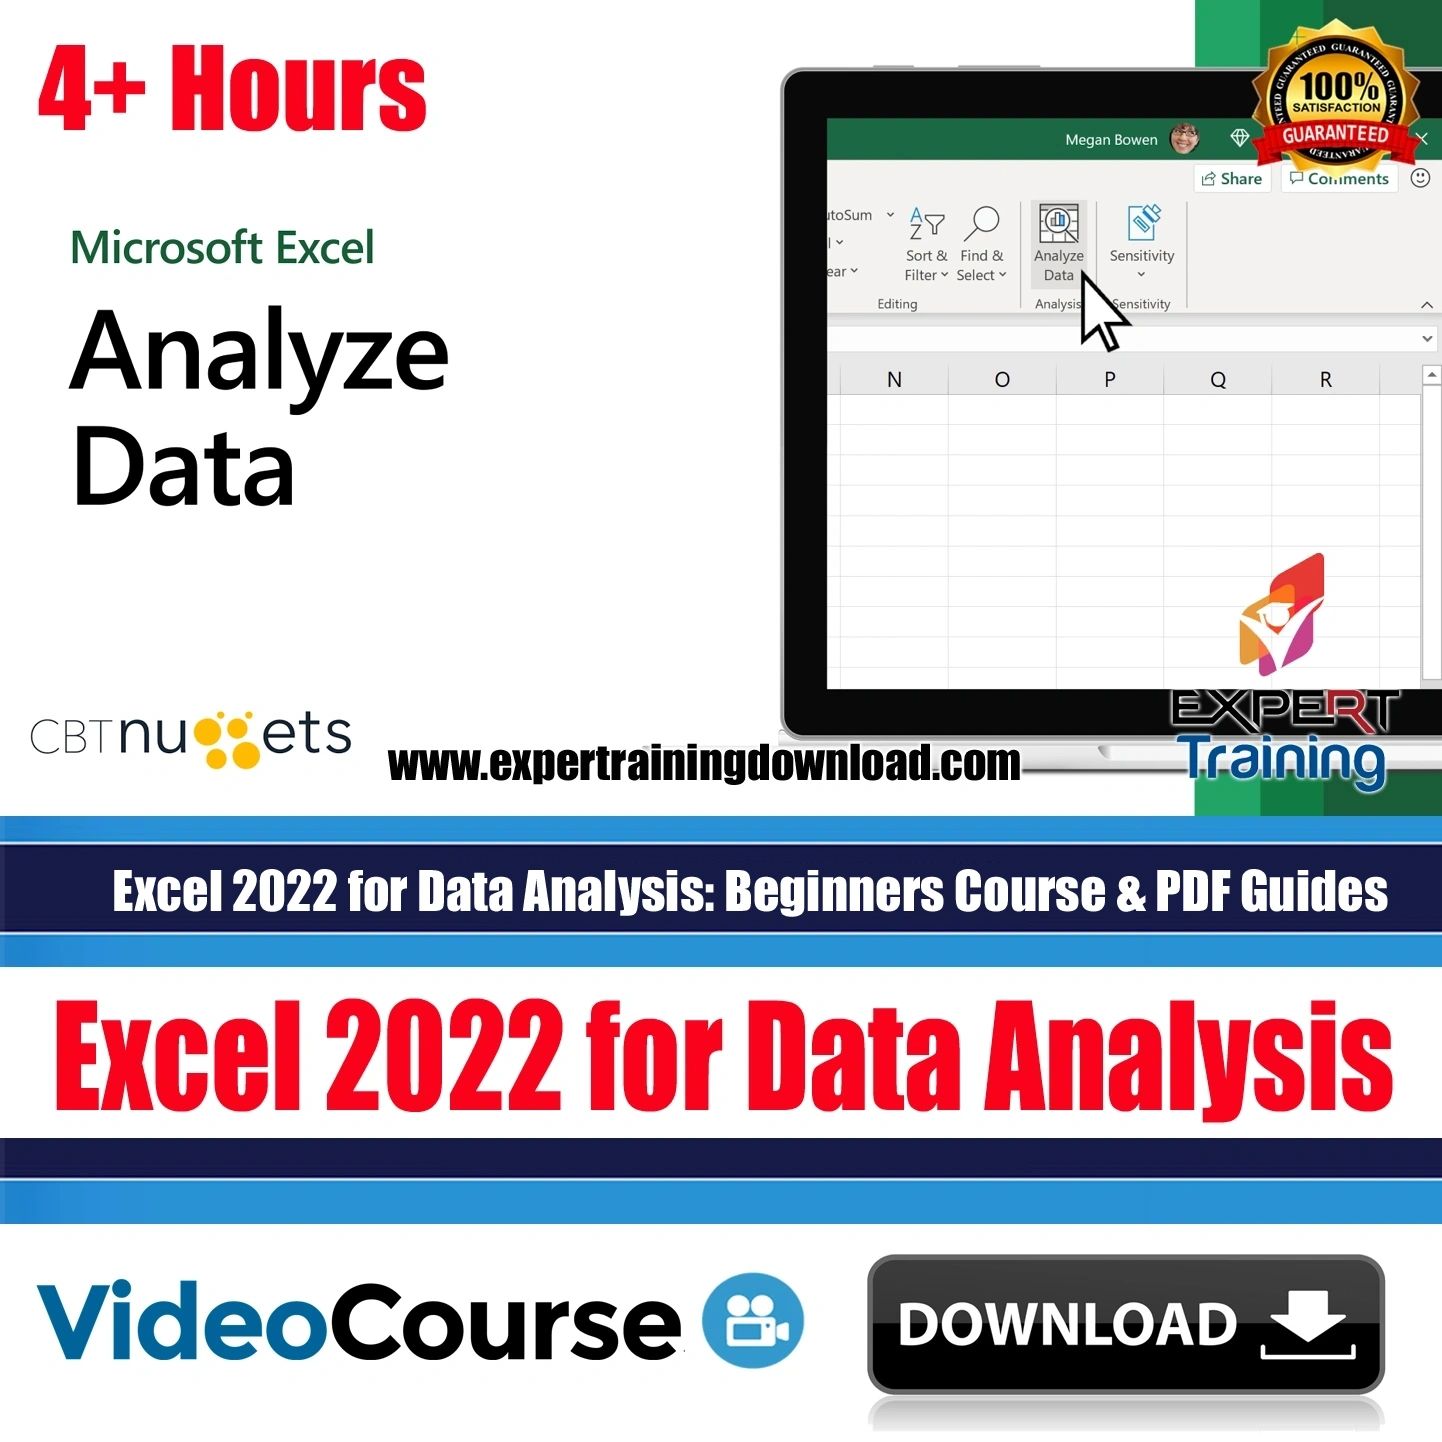 Excel 2022 for Data Analysis Beginners Course & PDF Guides